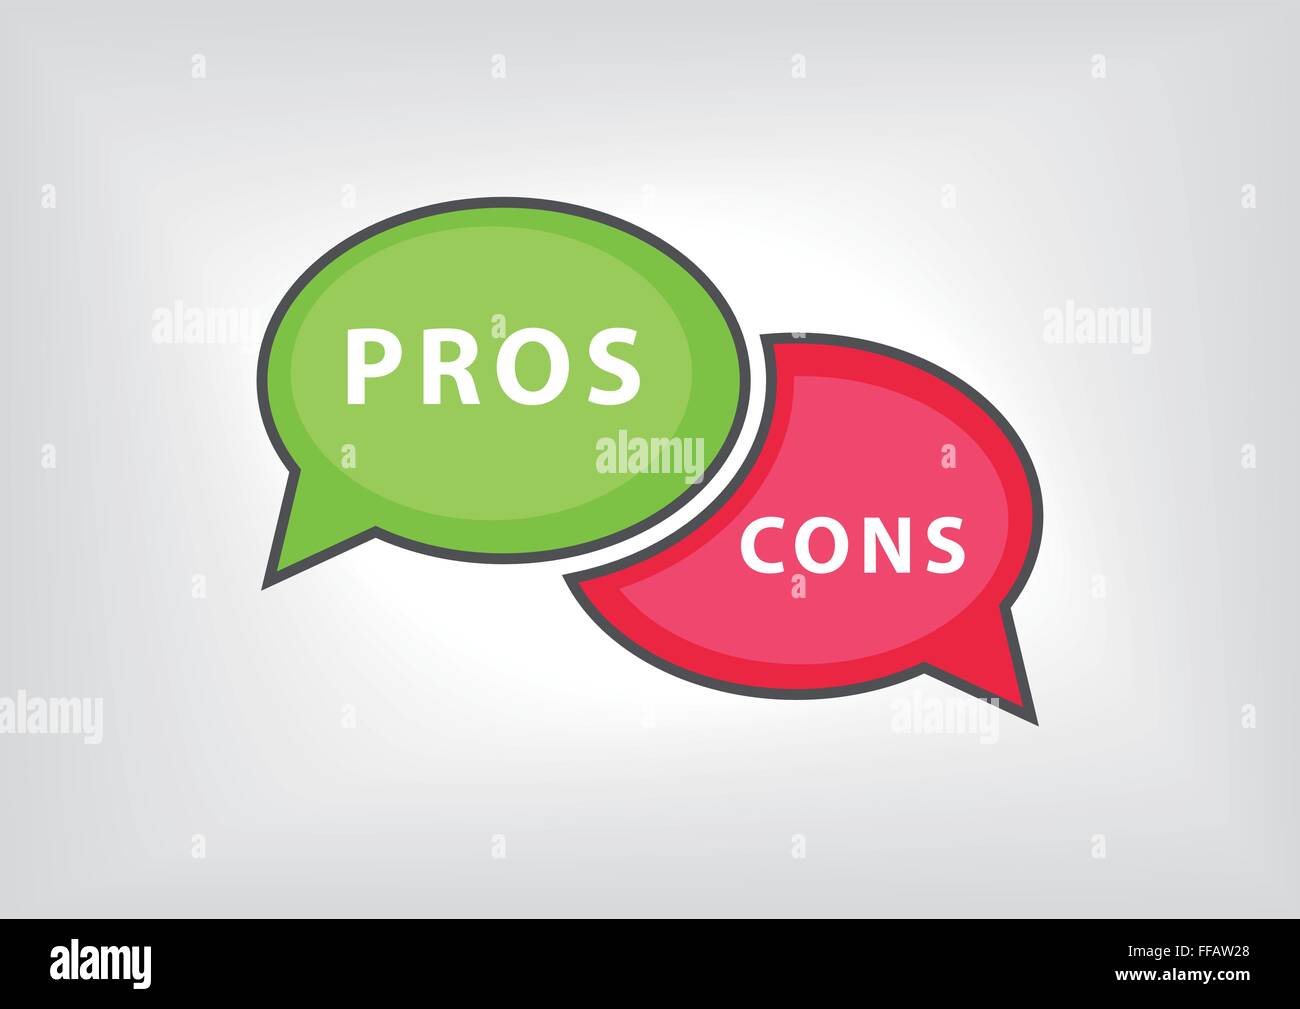 Pros versus cons as vector illustration with speech bubbles Stock Vector